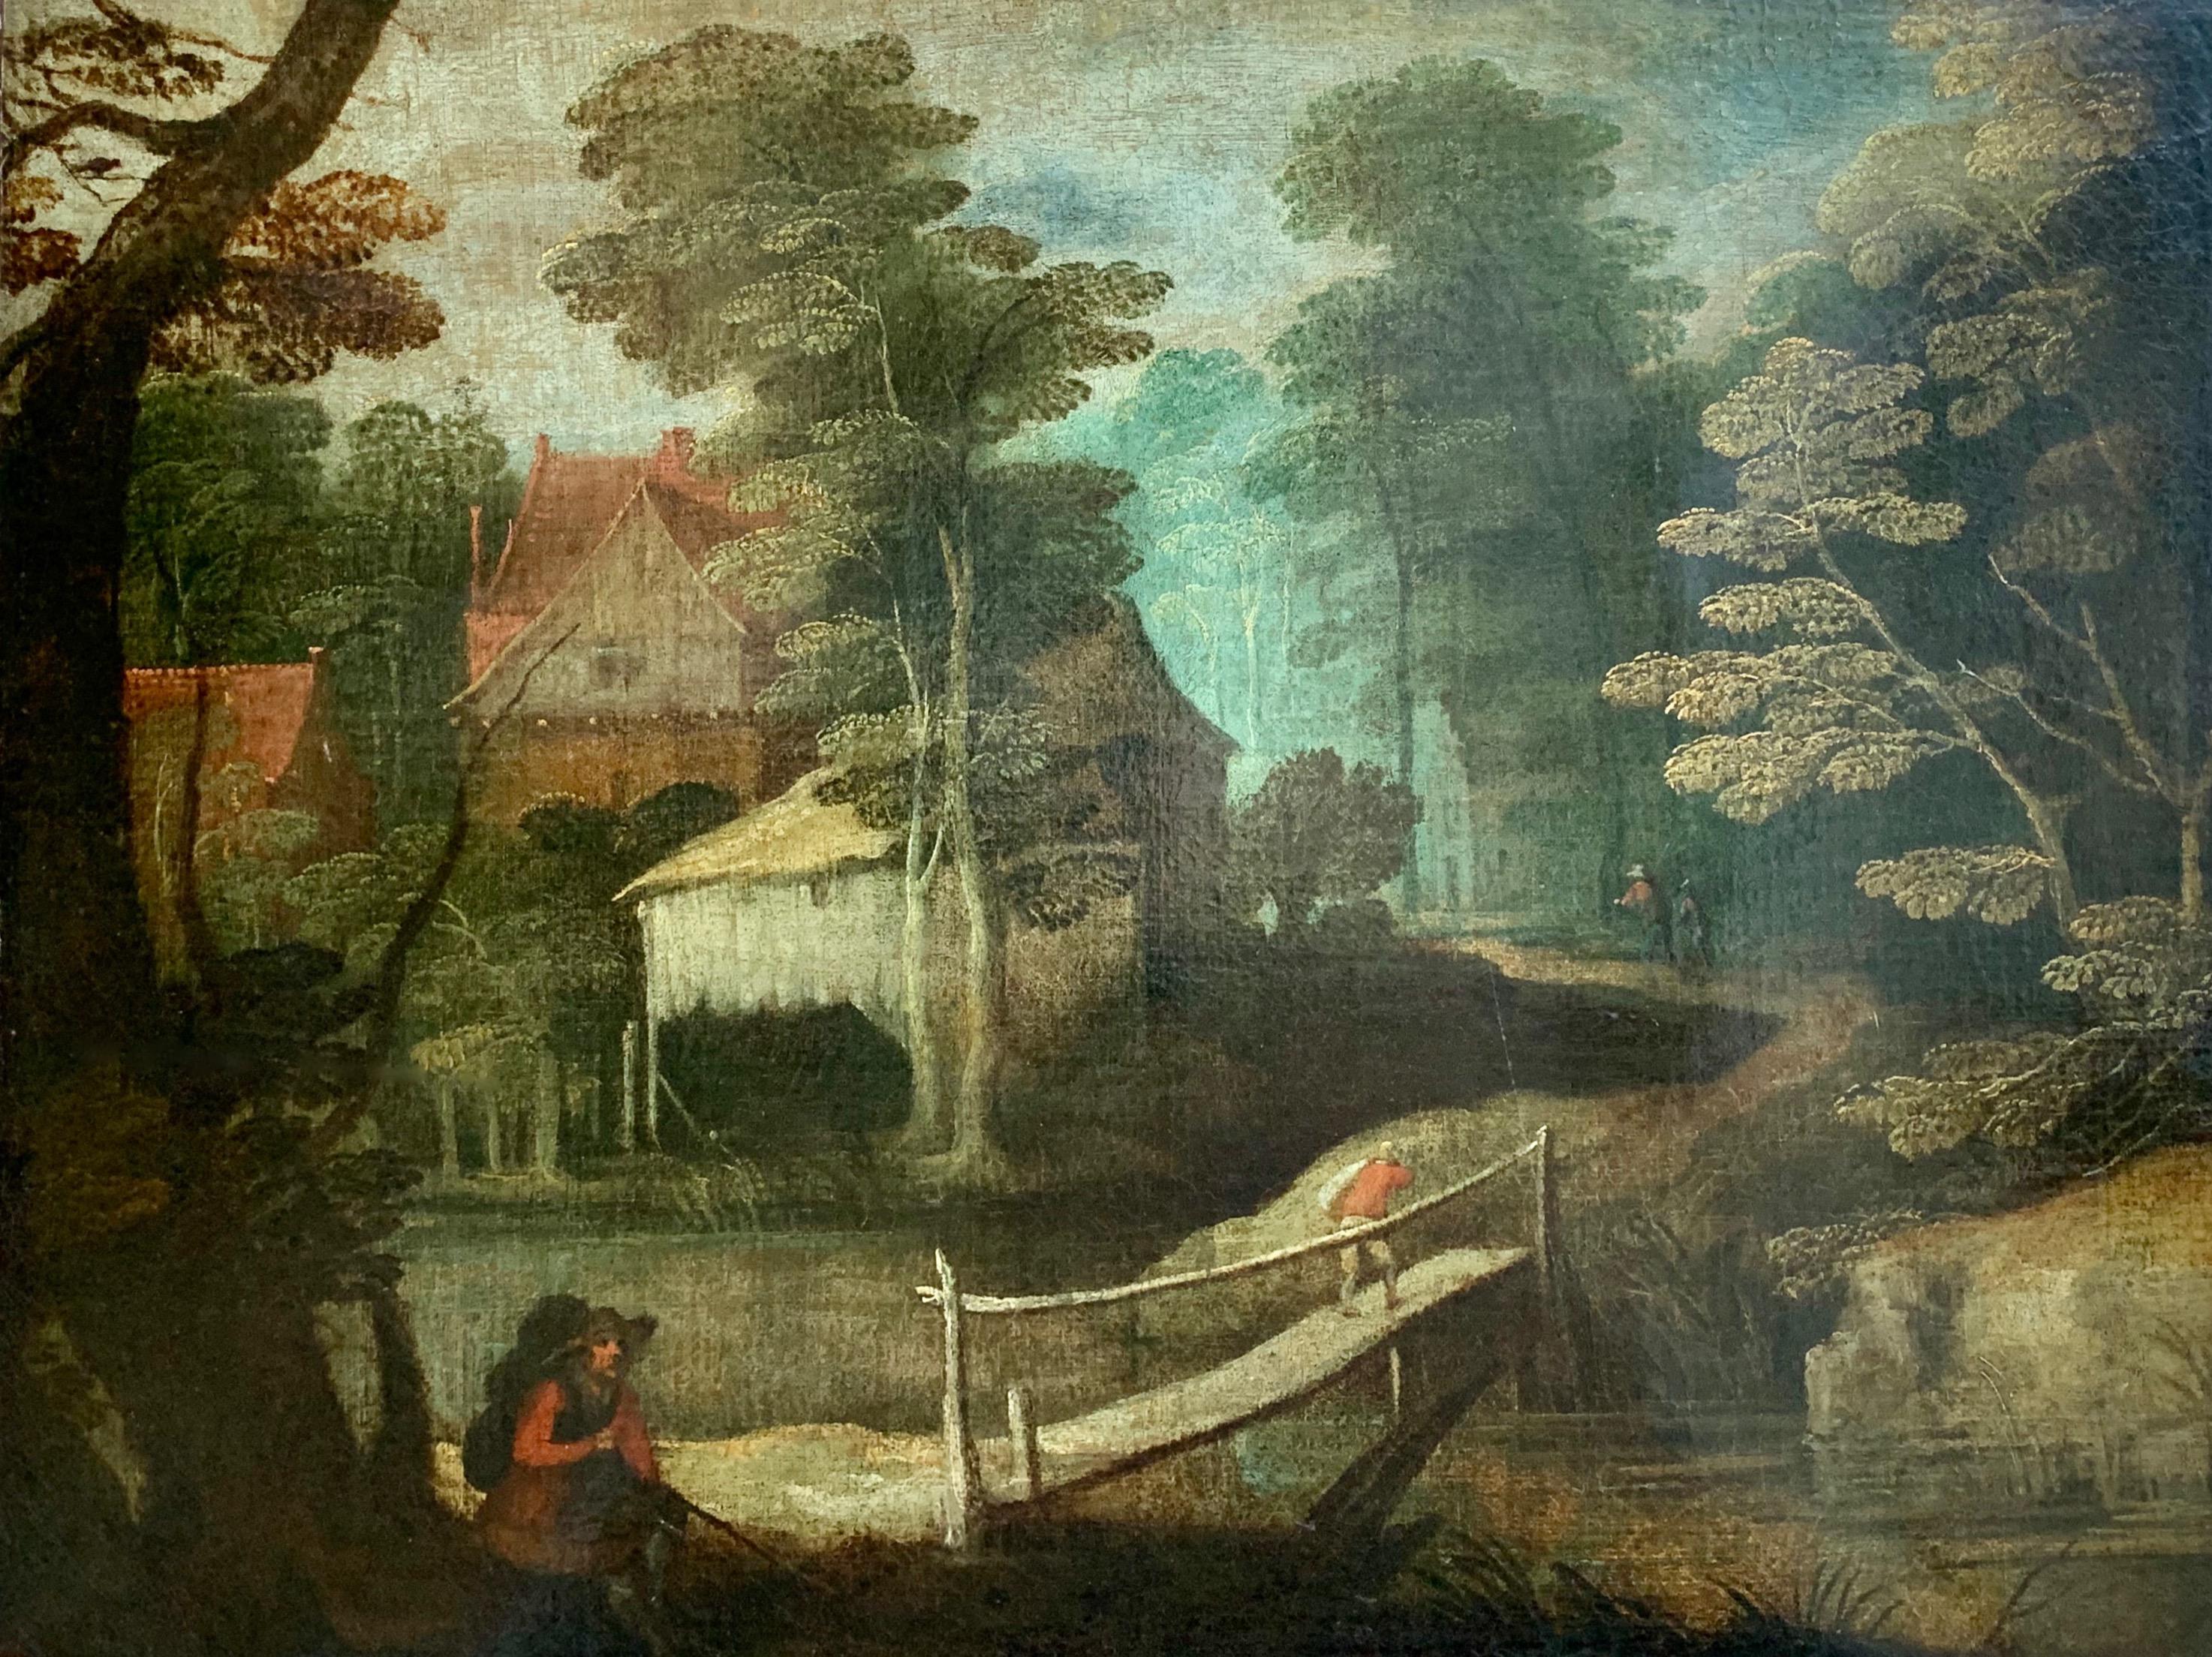 Unknown Landscape Painting - 16th century flemish painting - A breugellian hunting scene